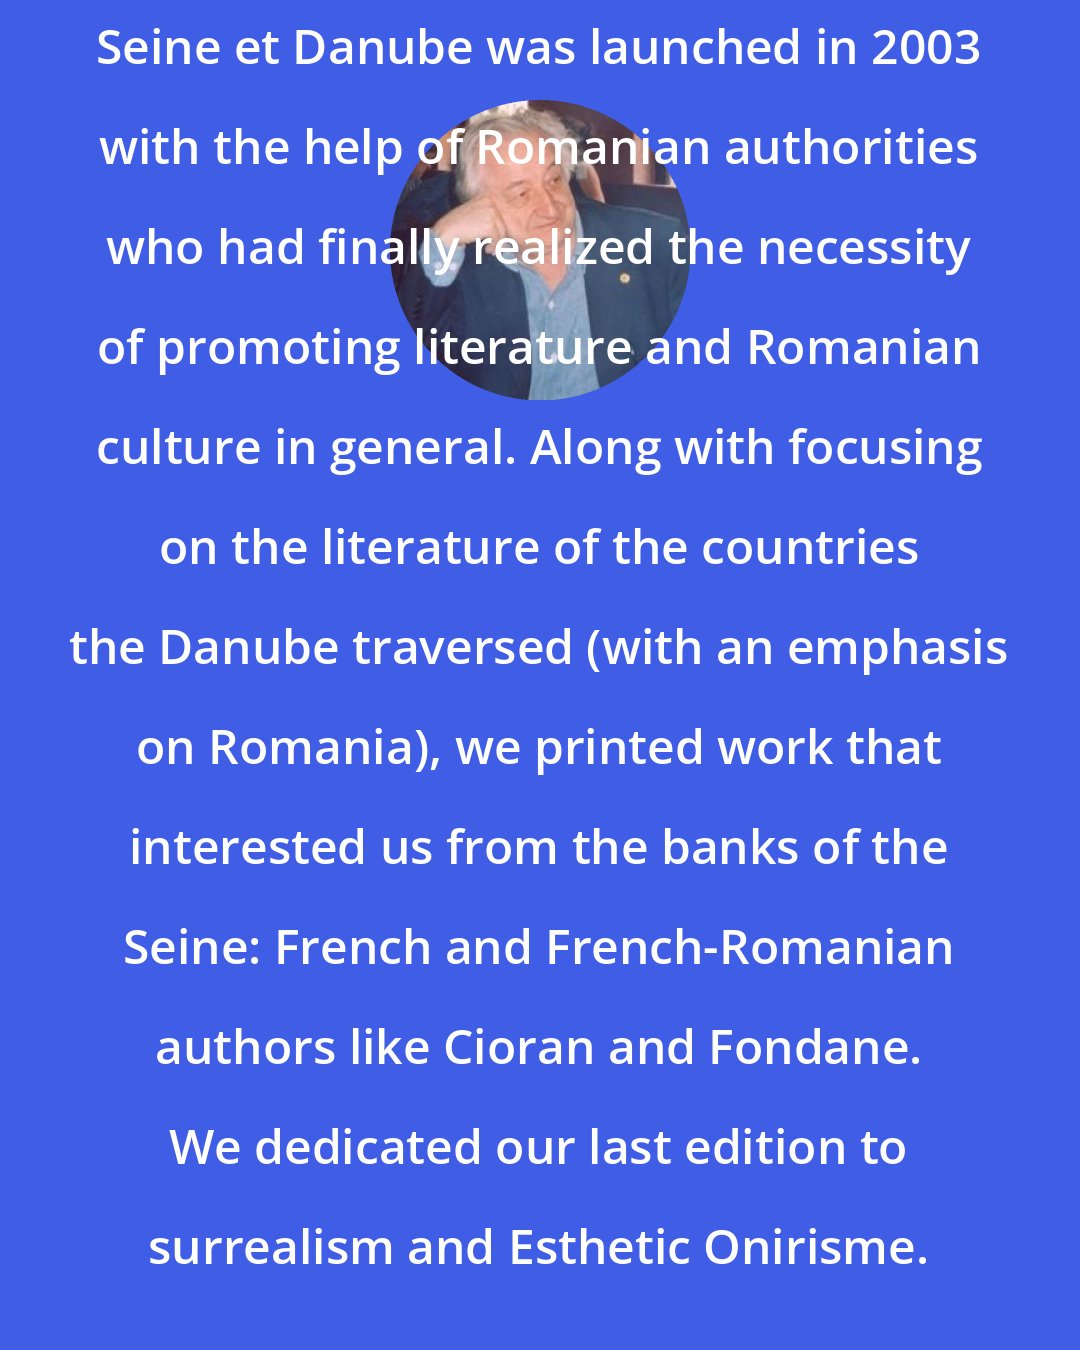 Dumitru Tepeneag: Seine et Danube was launched in 2003 with the help of Romanian authorities who had finally realized the necessity of promoting literature and Romanian culture in general. Along with focusing on the literature of the countries the Danube traversed (with an emphasis on Romania), we printed work that interested us from the banks of the Seine: French and French-Romanian authors like Cioran and Fondane. We dedicated our last edition to surrealism and Esthetic Onirisme.